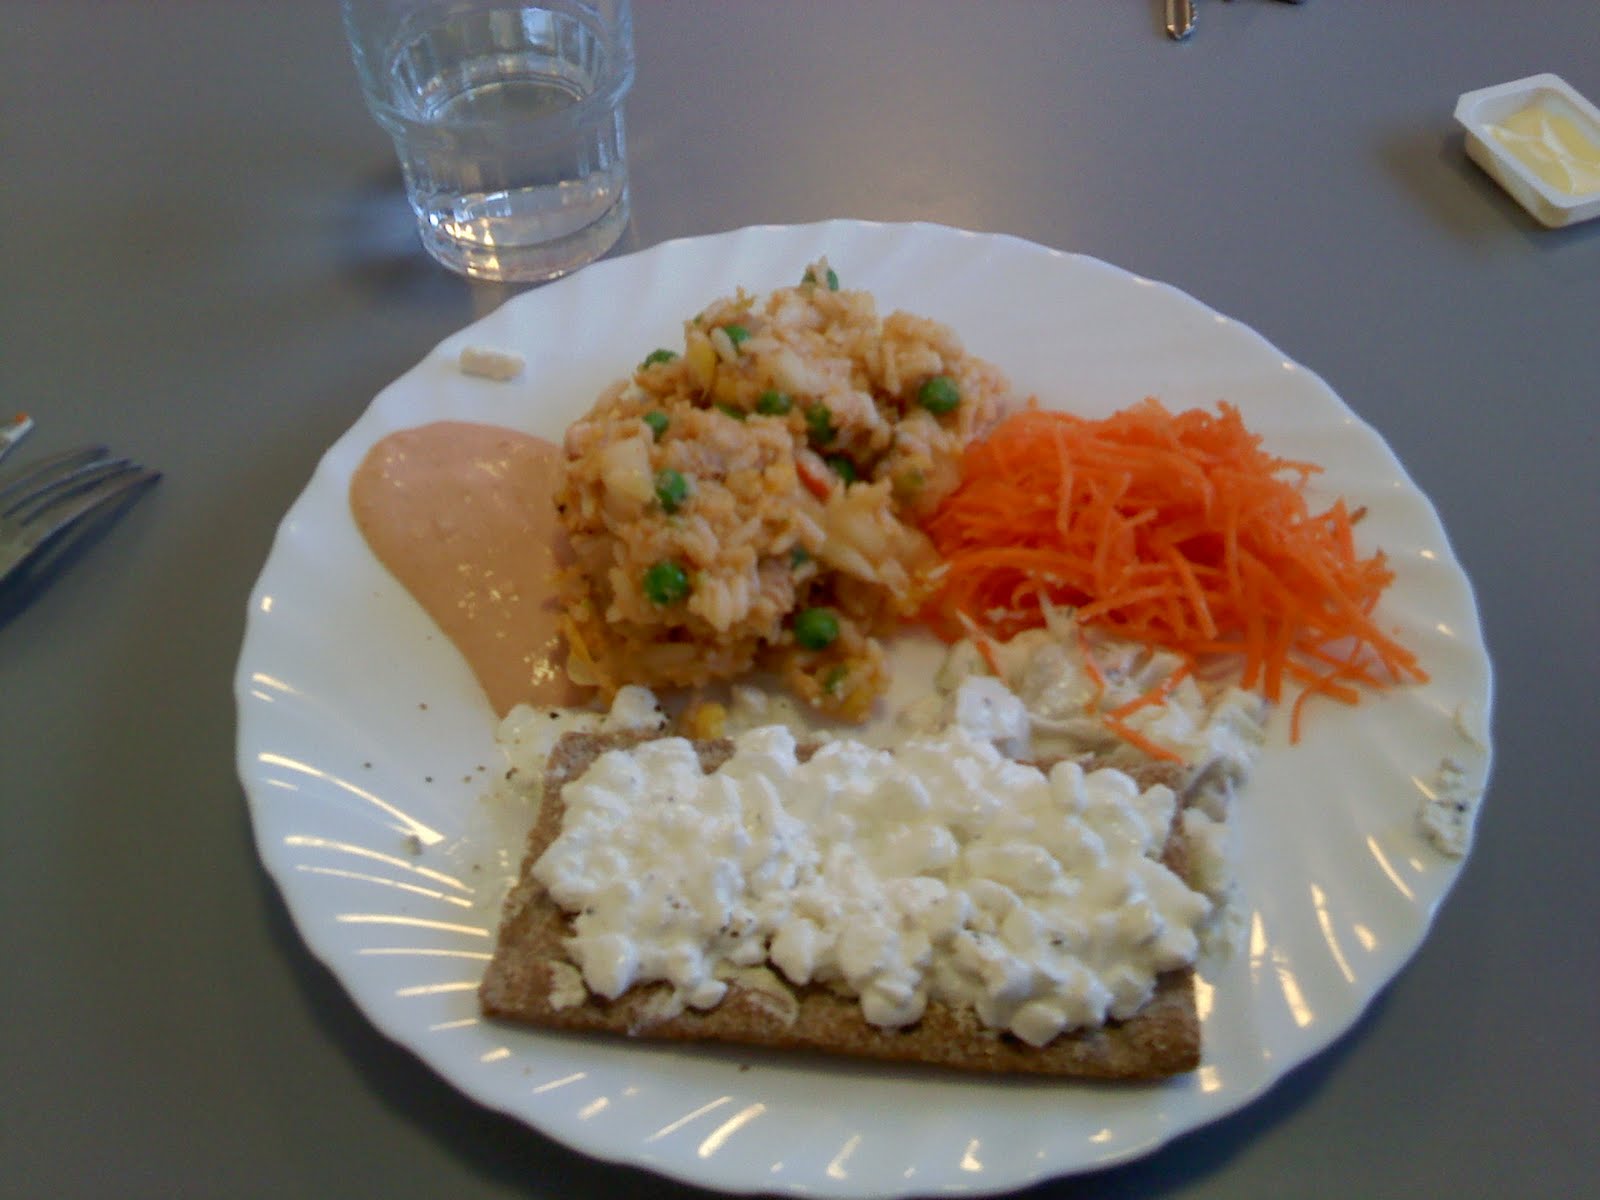 Country: Sweden. Contents: Chicken salad, cottage cheese on knckebrd, shredded carrot, sauce.